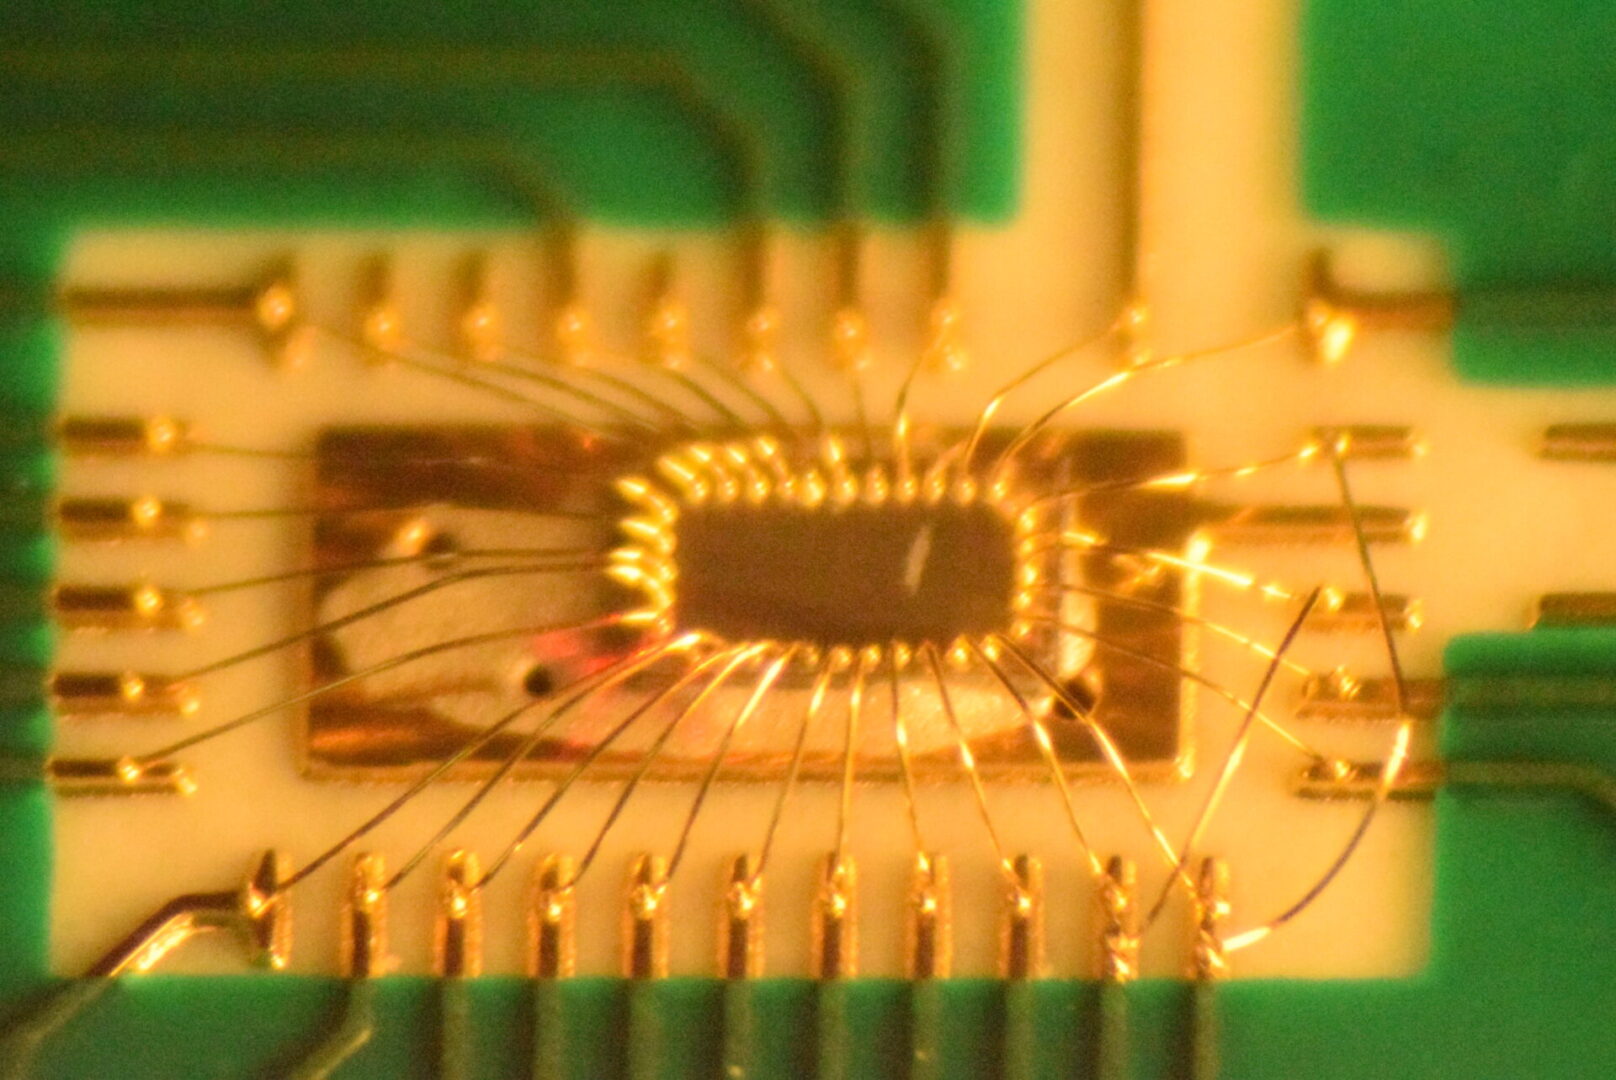 A close up of the inside of an electronic device.